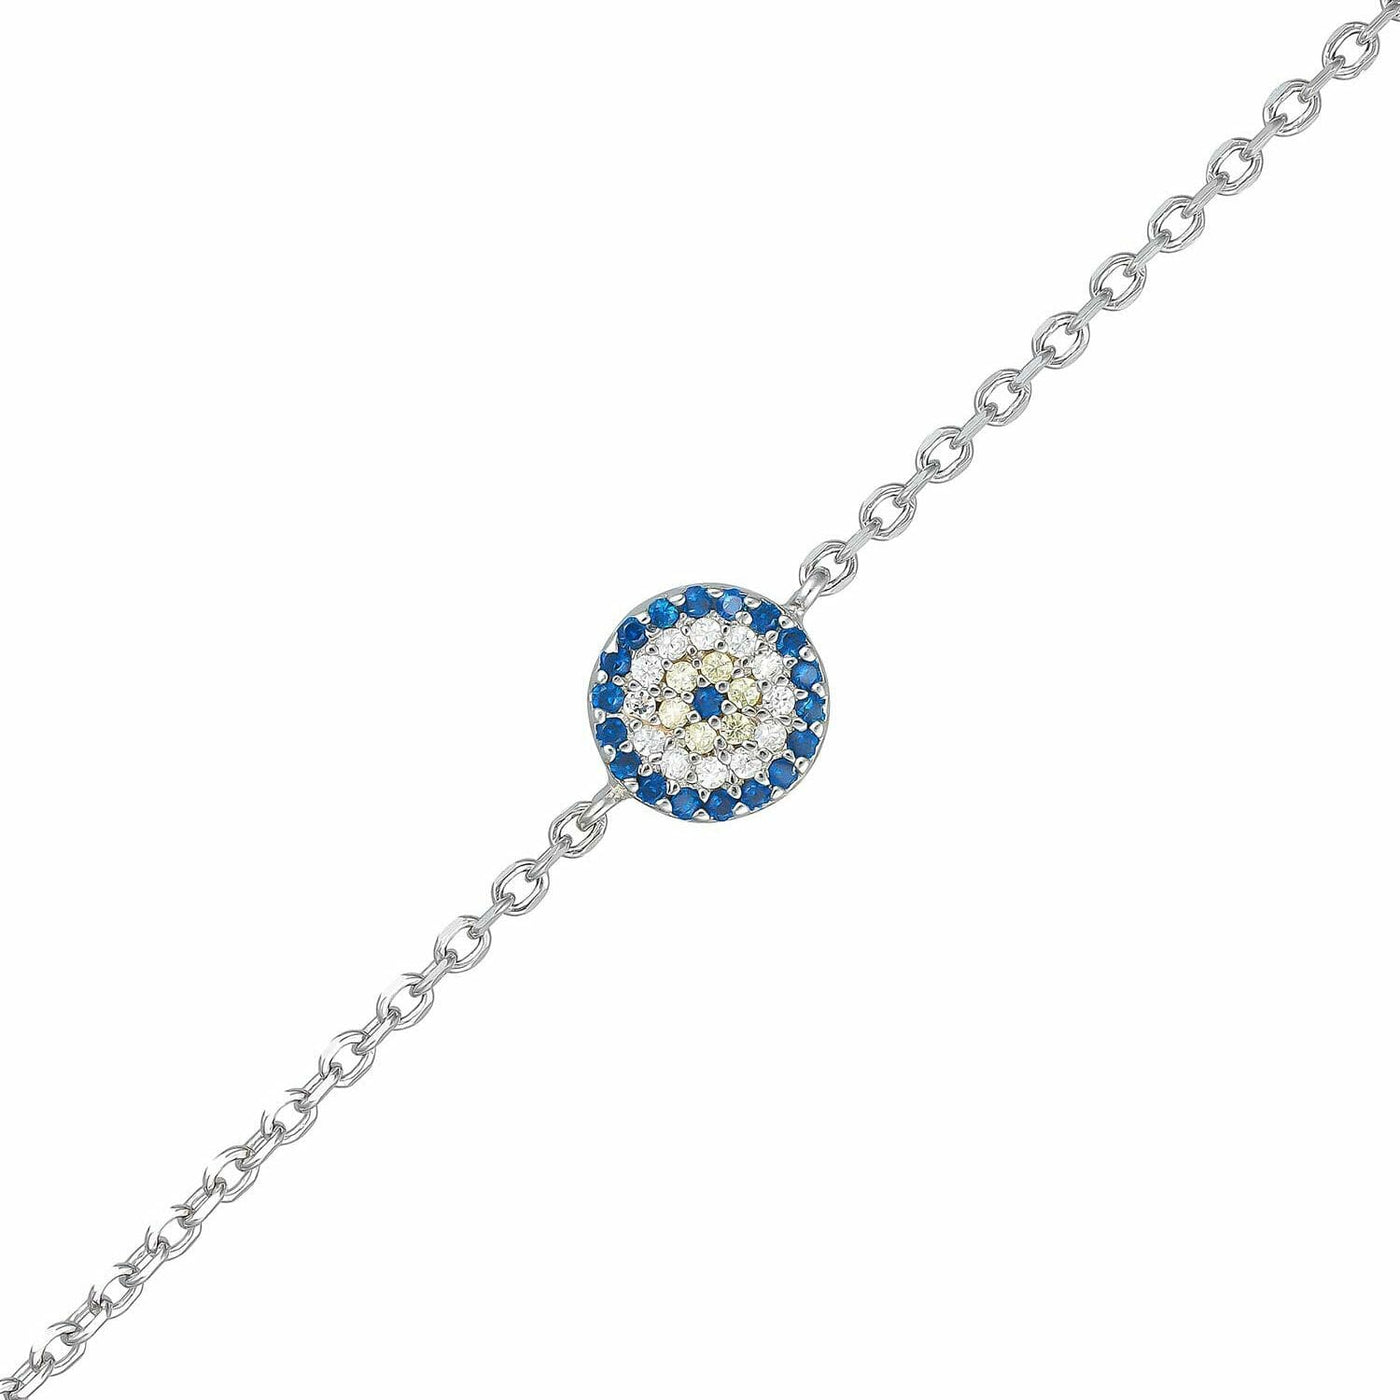 Rhodium Plated Sterling Silver Blue and Yellow CZ Evil Eye Bracelet - 17+3cm